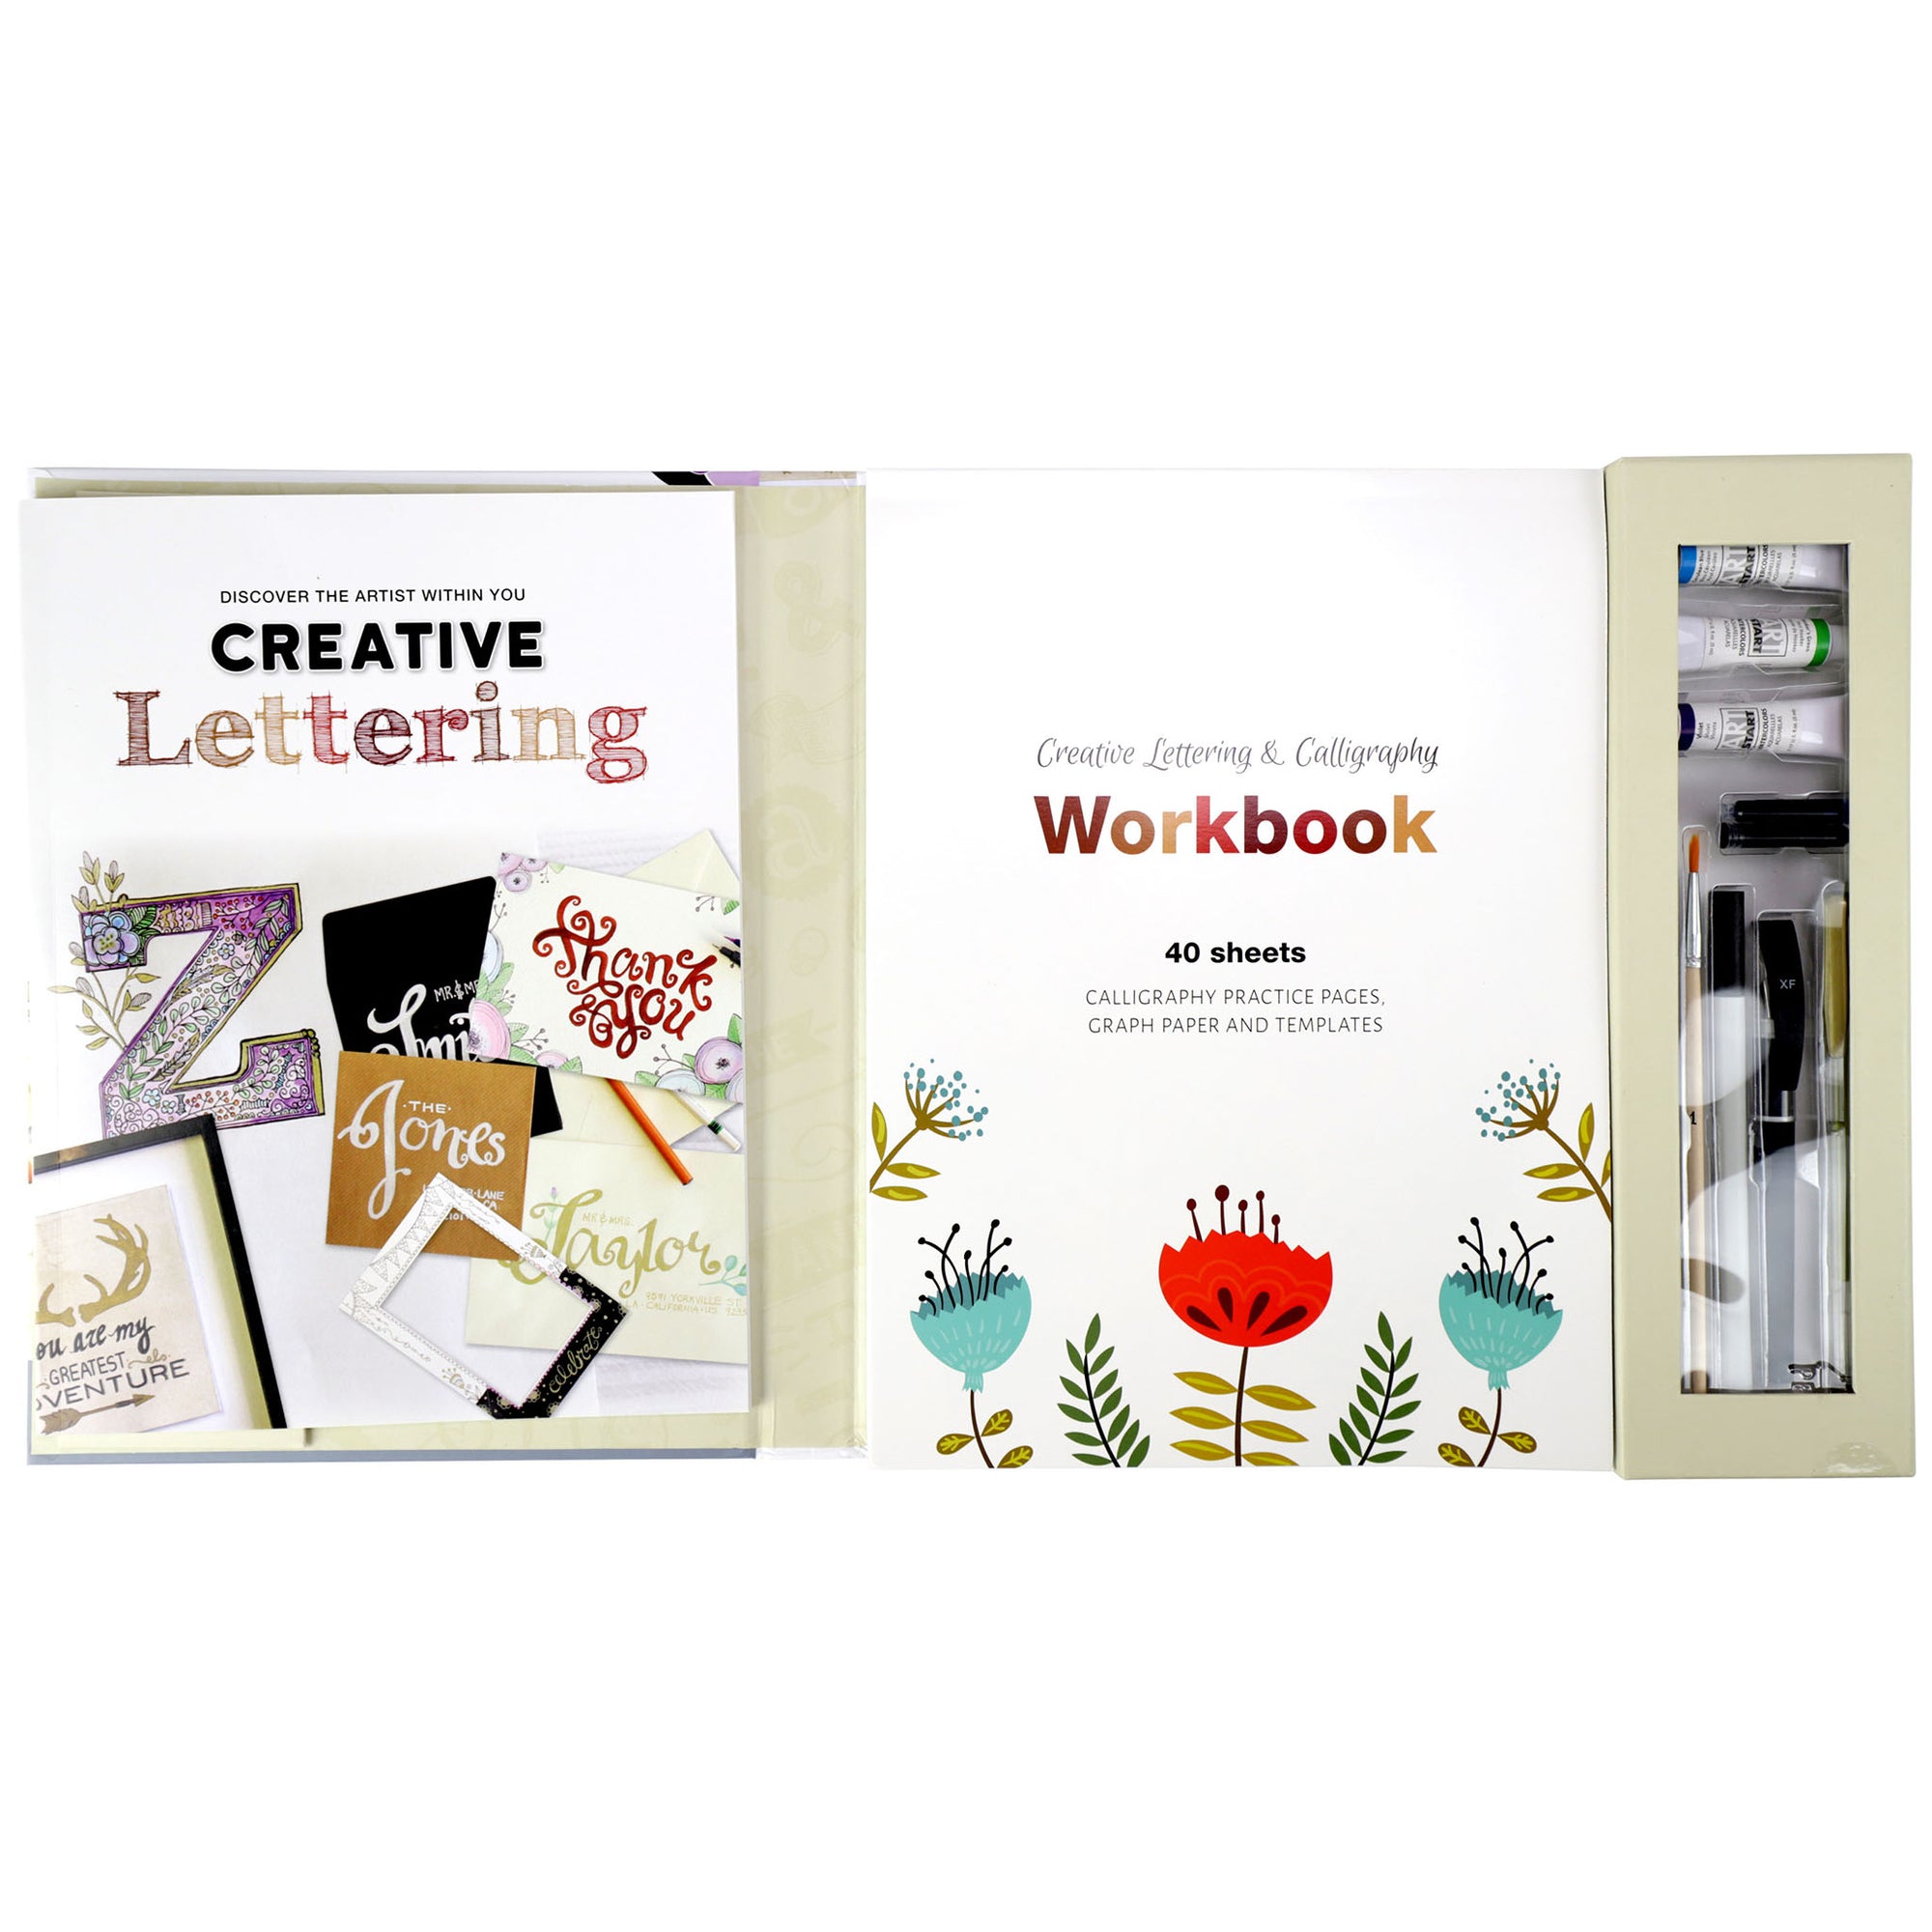 Art School Creative Lettering and Calligraphy Set